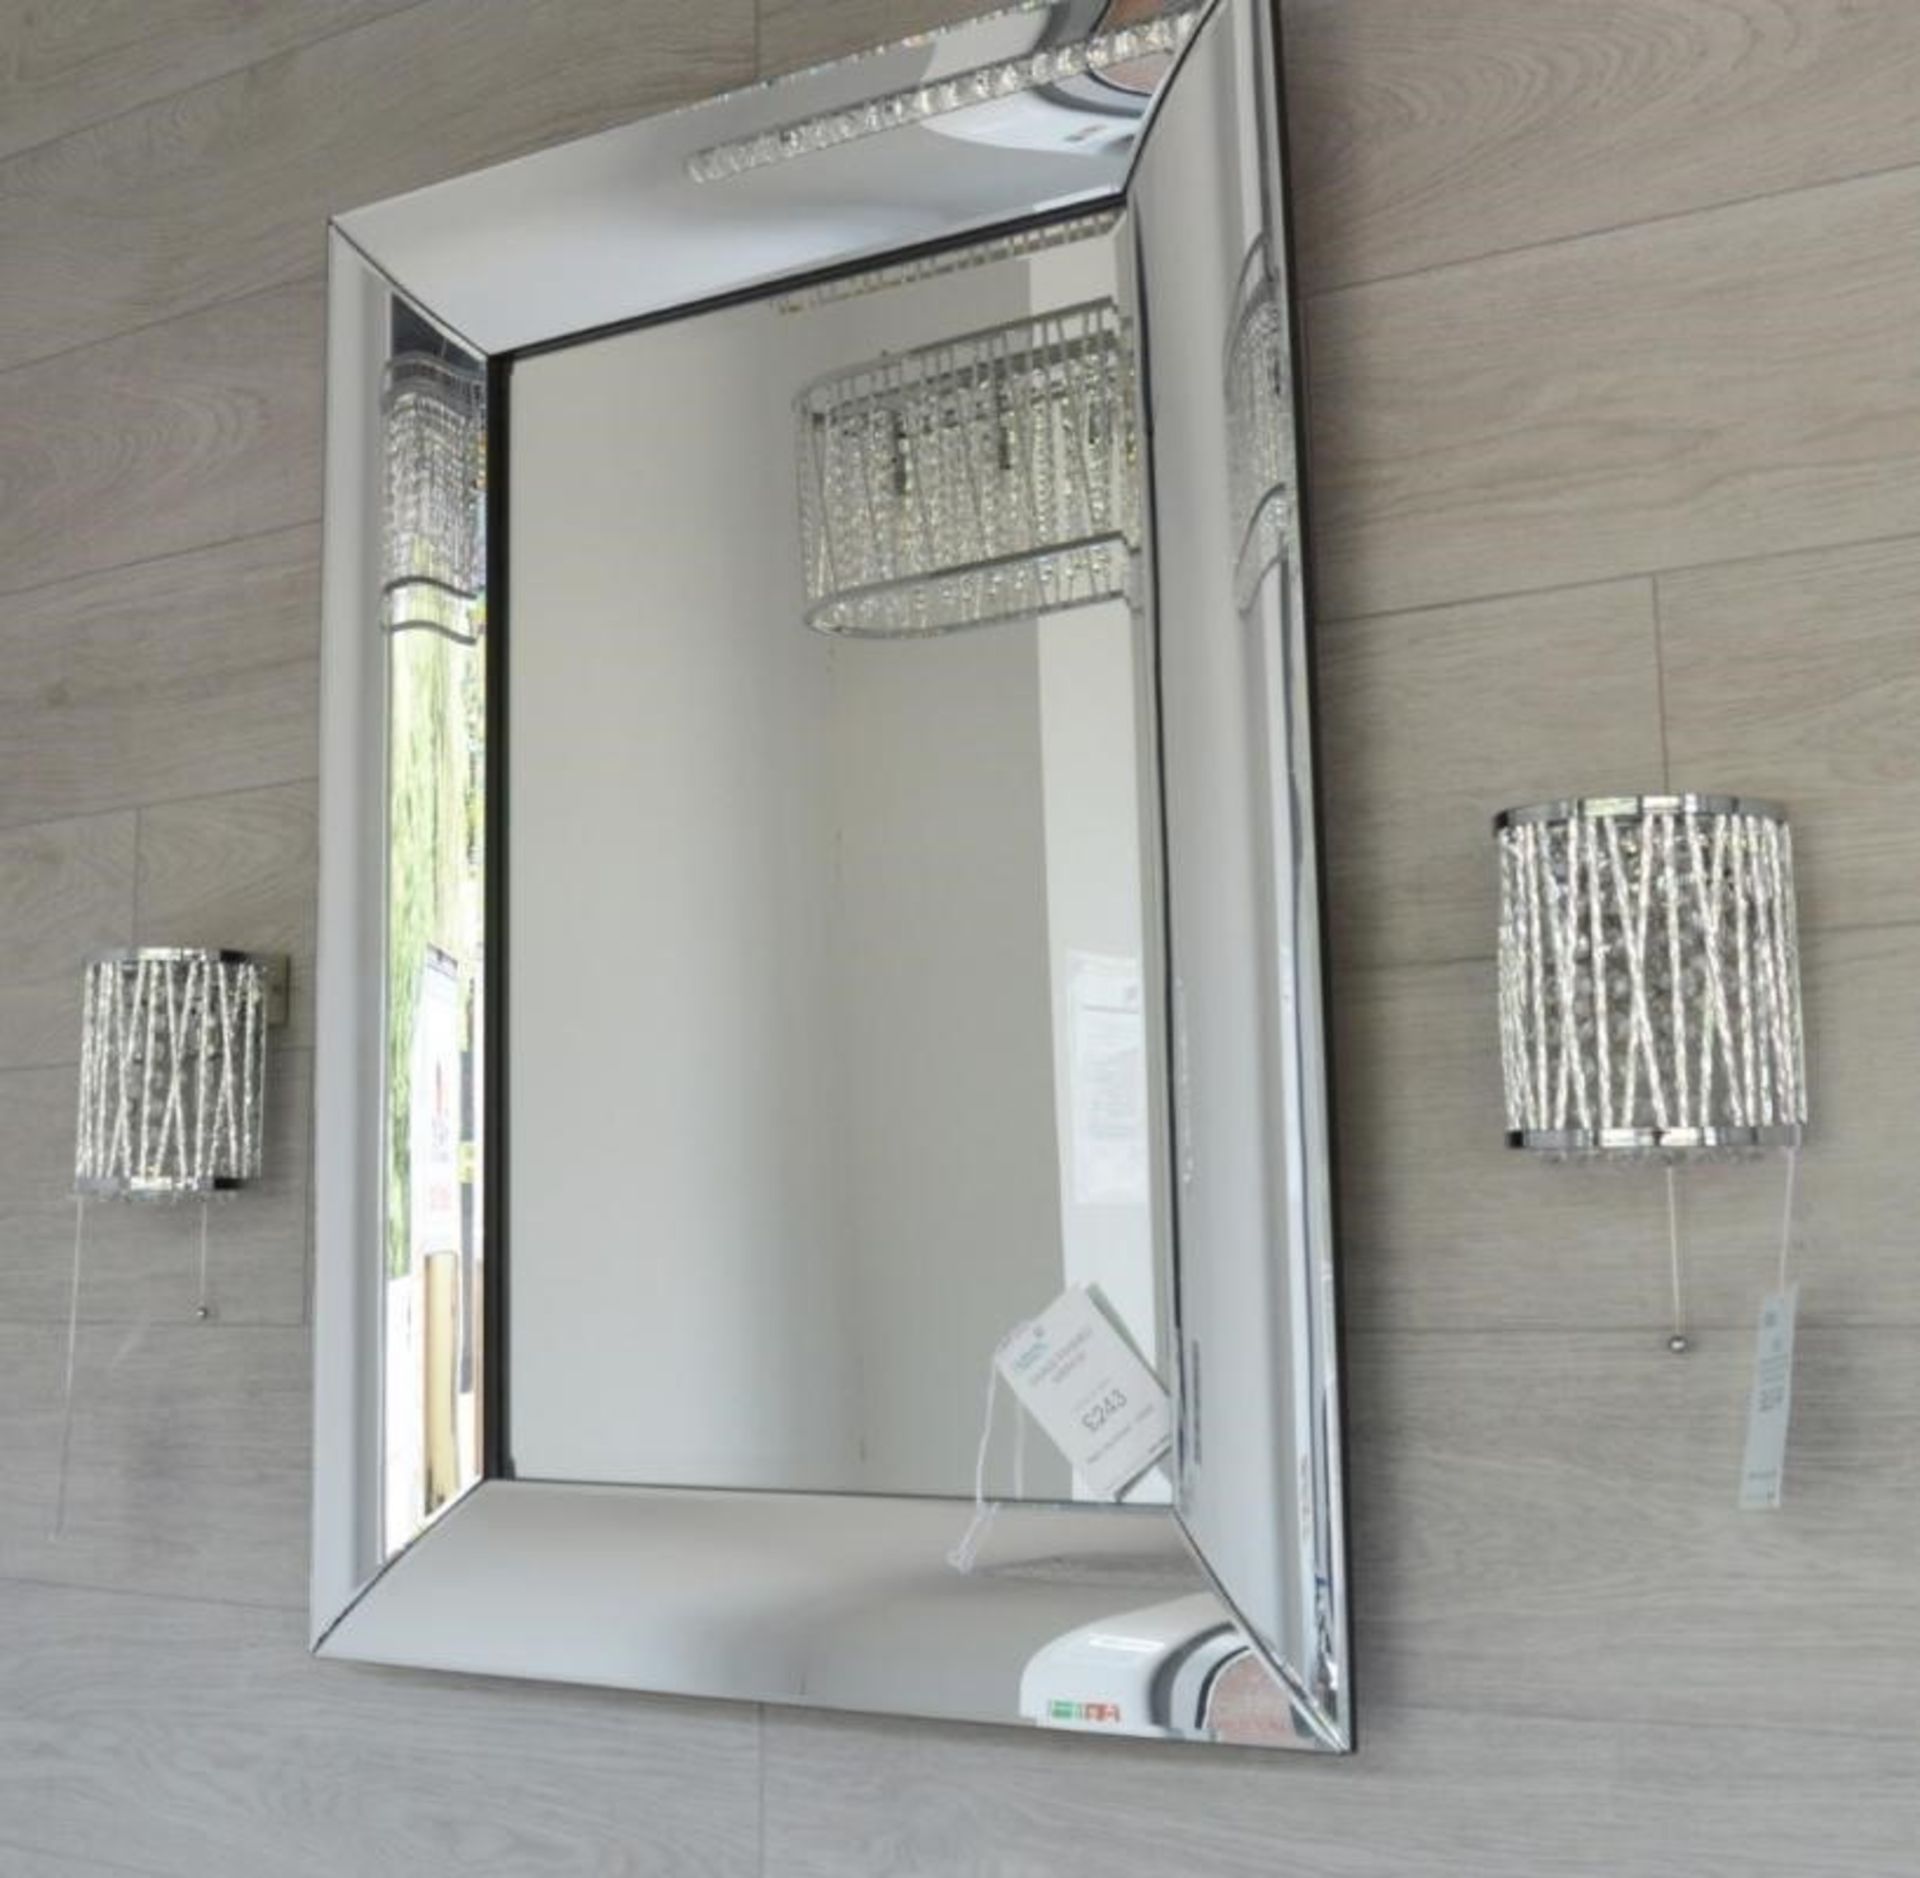 2 x (Pair of) Elise 2 Light Chrome Wall Bracket With Crystal Drops and Metal Twisted Rods - Ex Displ - Image 3 of 5